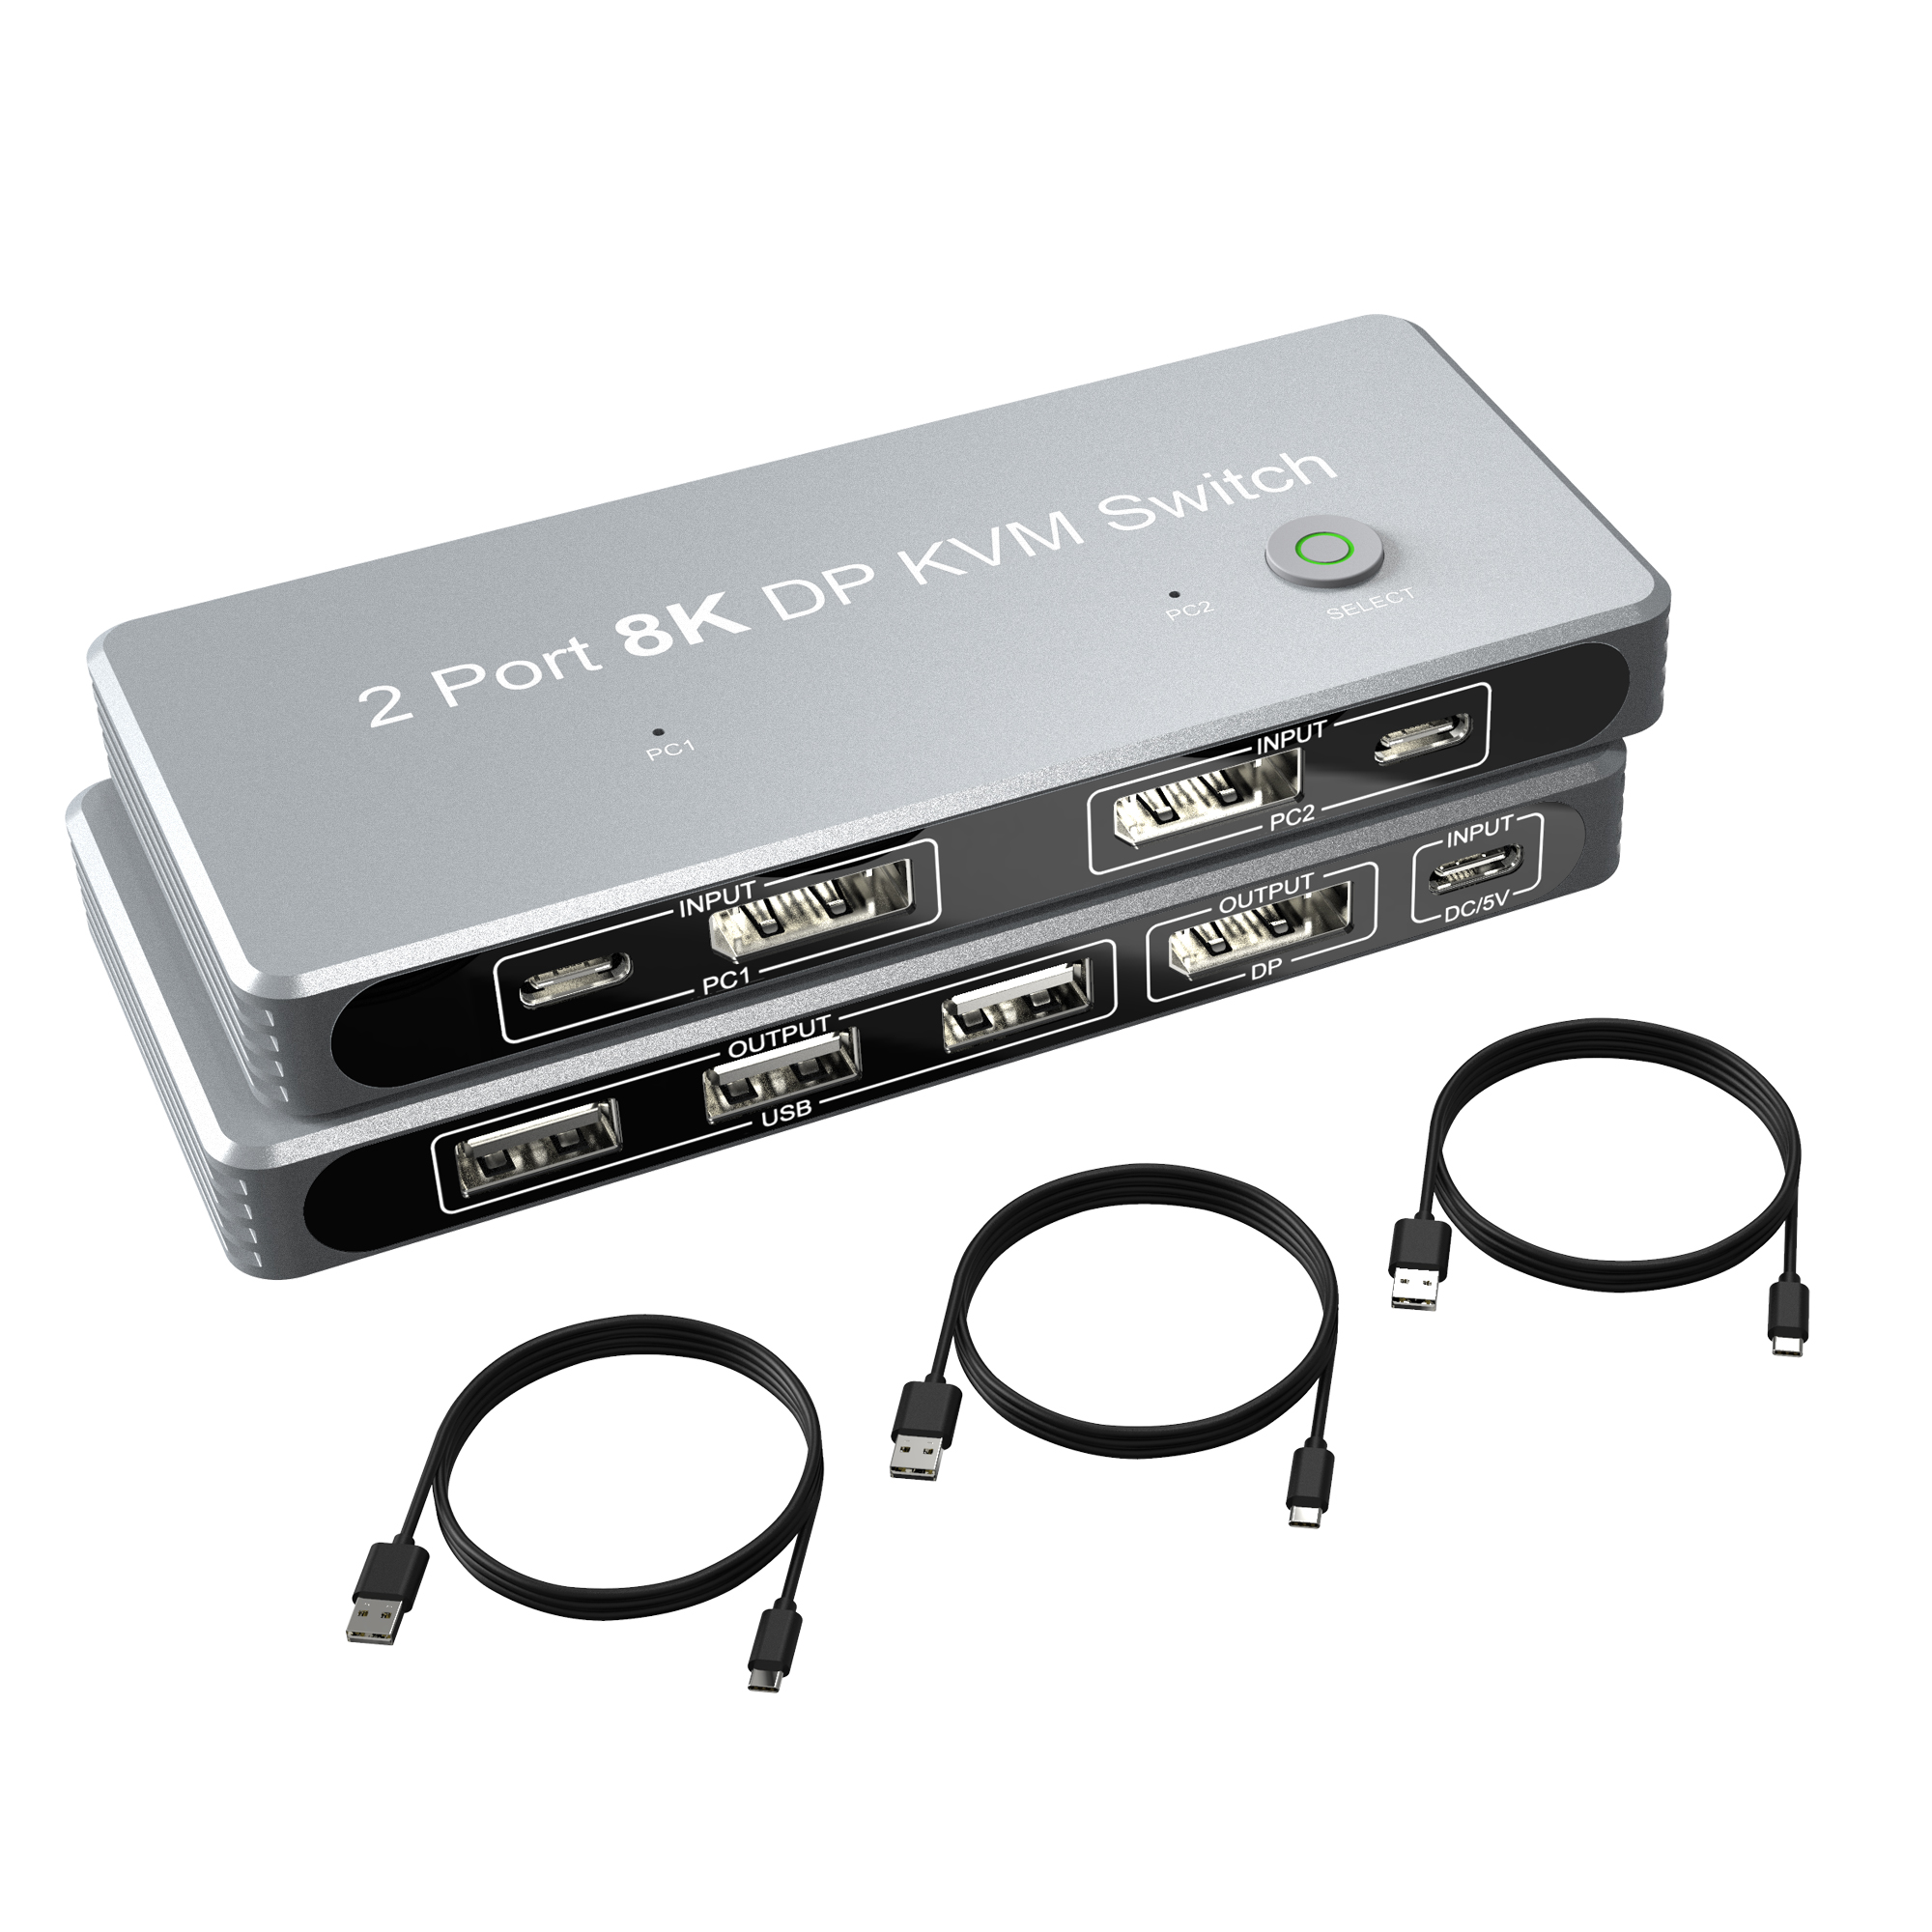 CableDeconn DisplayPort 1.4 8K KVM Switch DP 2 PC 1 DP Monitor 2In 1Out 8K@60Hz 4K@144Hz with 3X USB2.0 Port 2 PC Sharing one Keyboard Mouse T0206